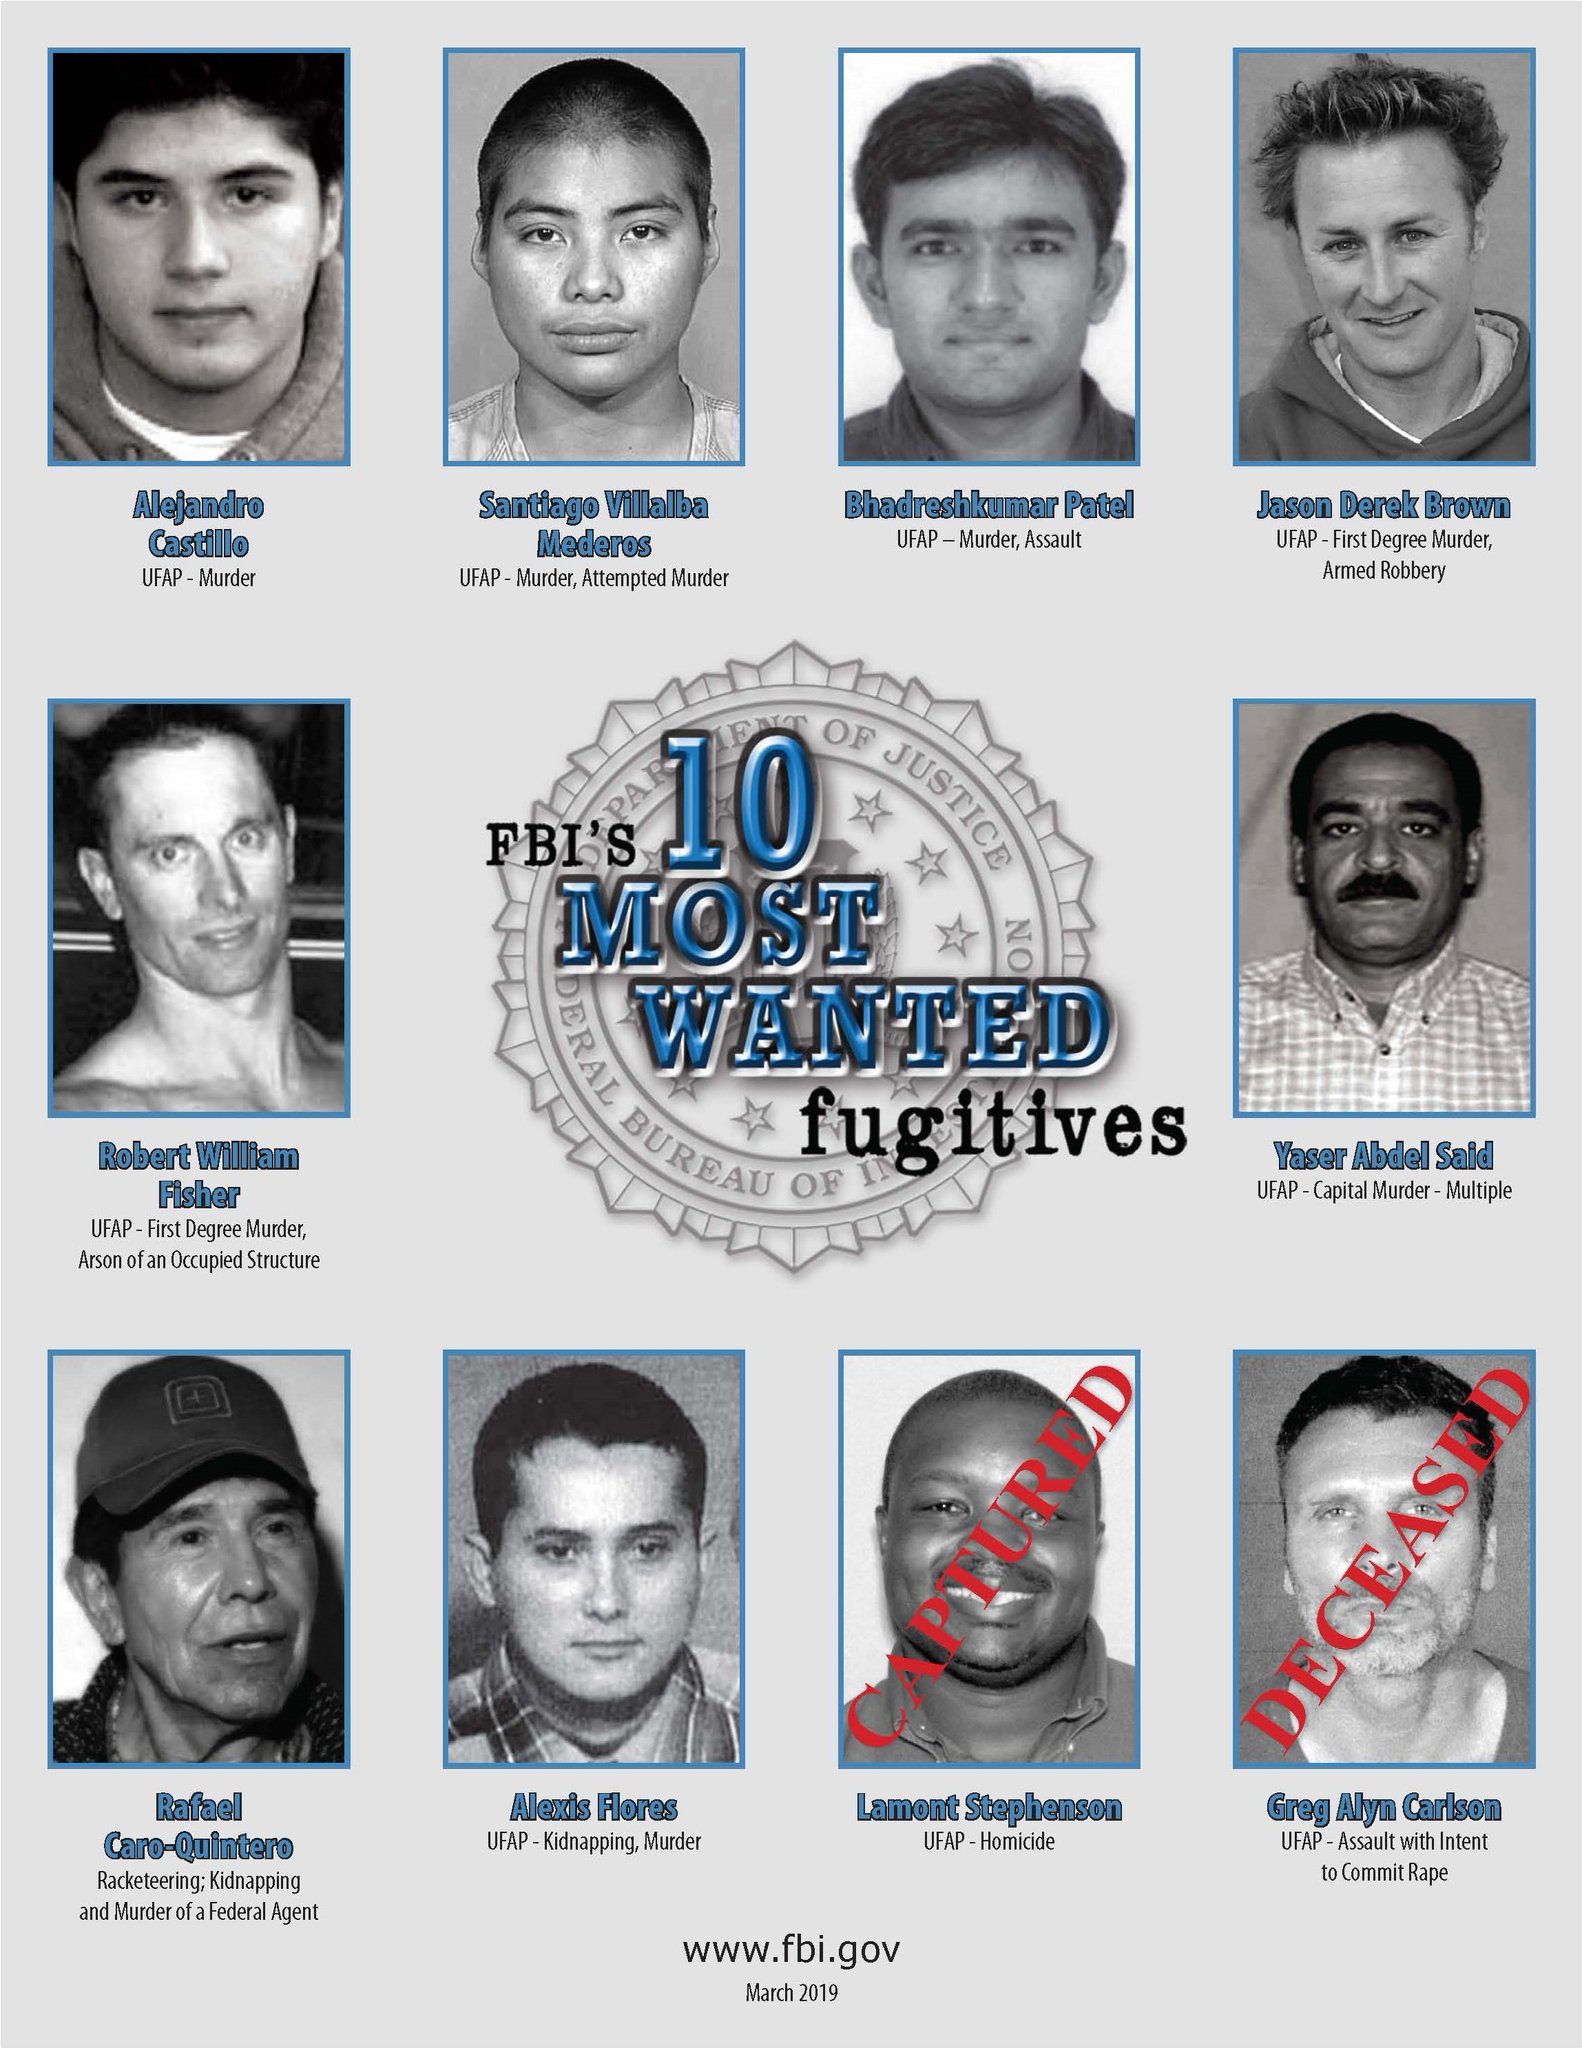 FBI on Twitter: "The #FBI's Ten Most Wanted Fugitives List has evolved over the years, but the the same—to dangerous #fugitives who might not otherwise merit national attention. Learn